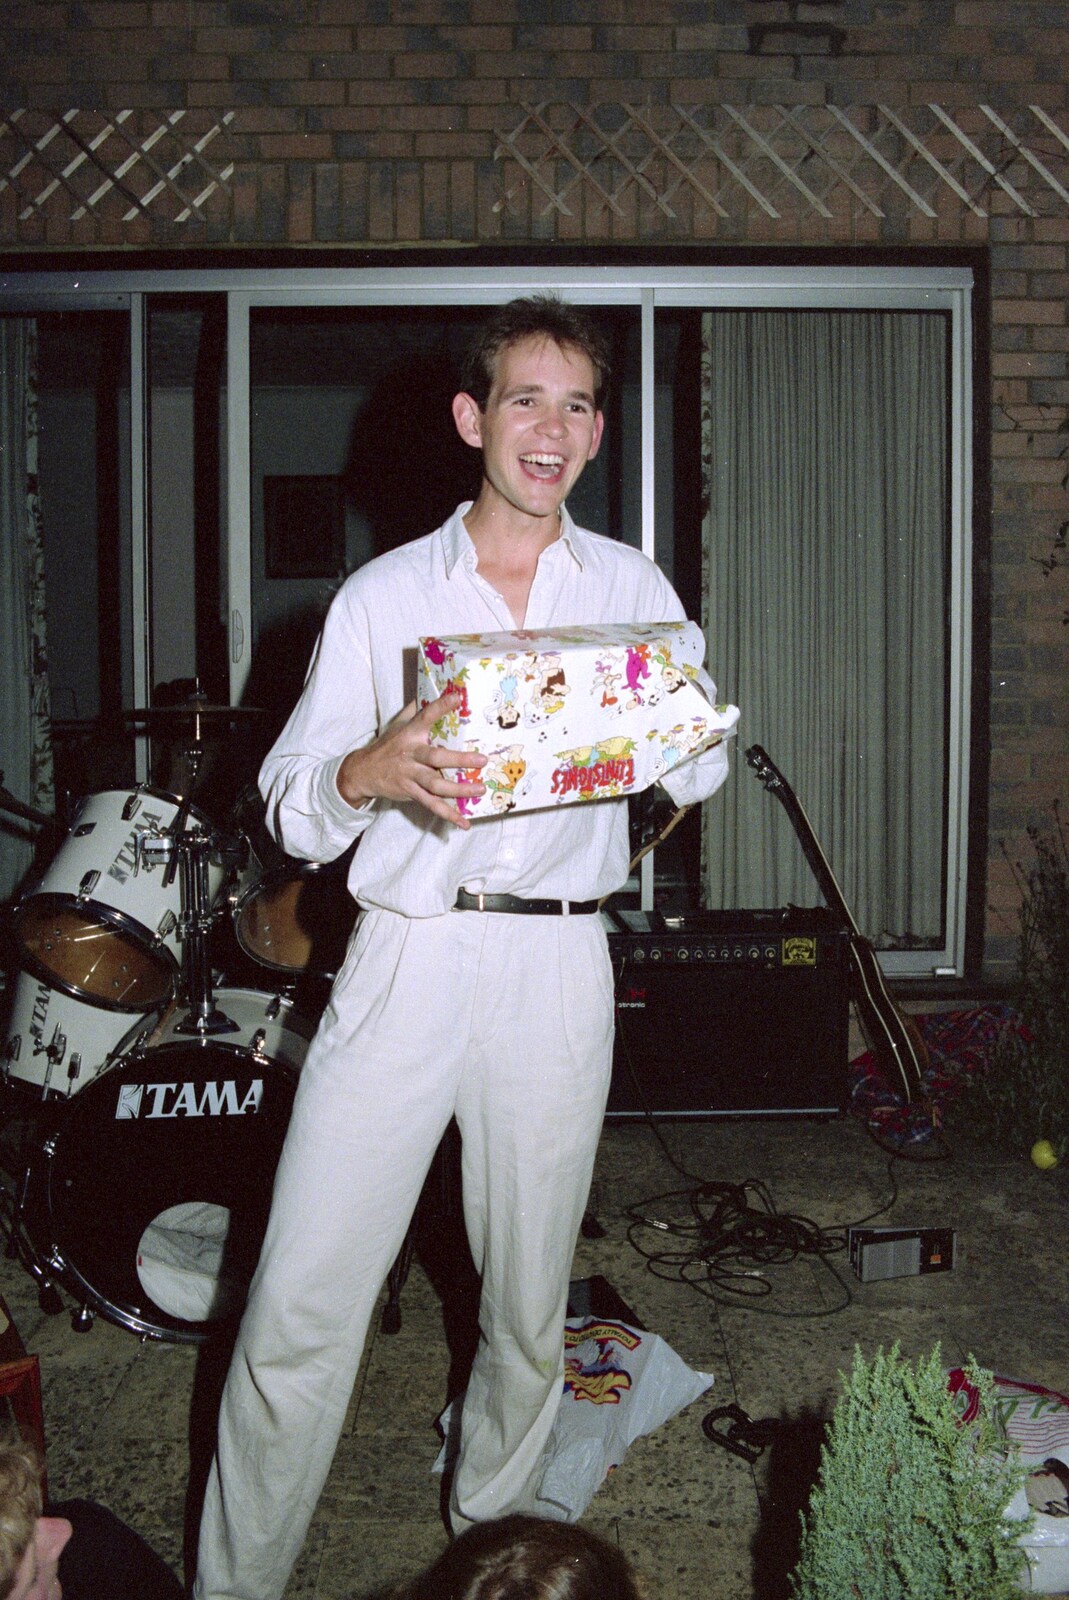 Chris and Phil's Party, Hordle, Hampshire - 6th September 1989: Phil opens his birthday present